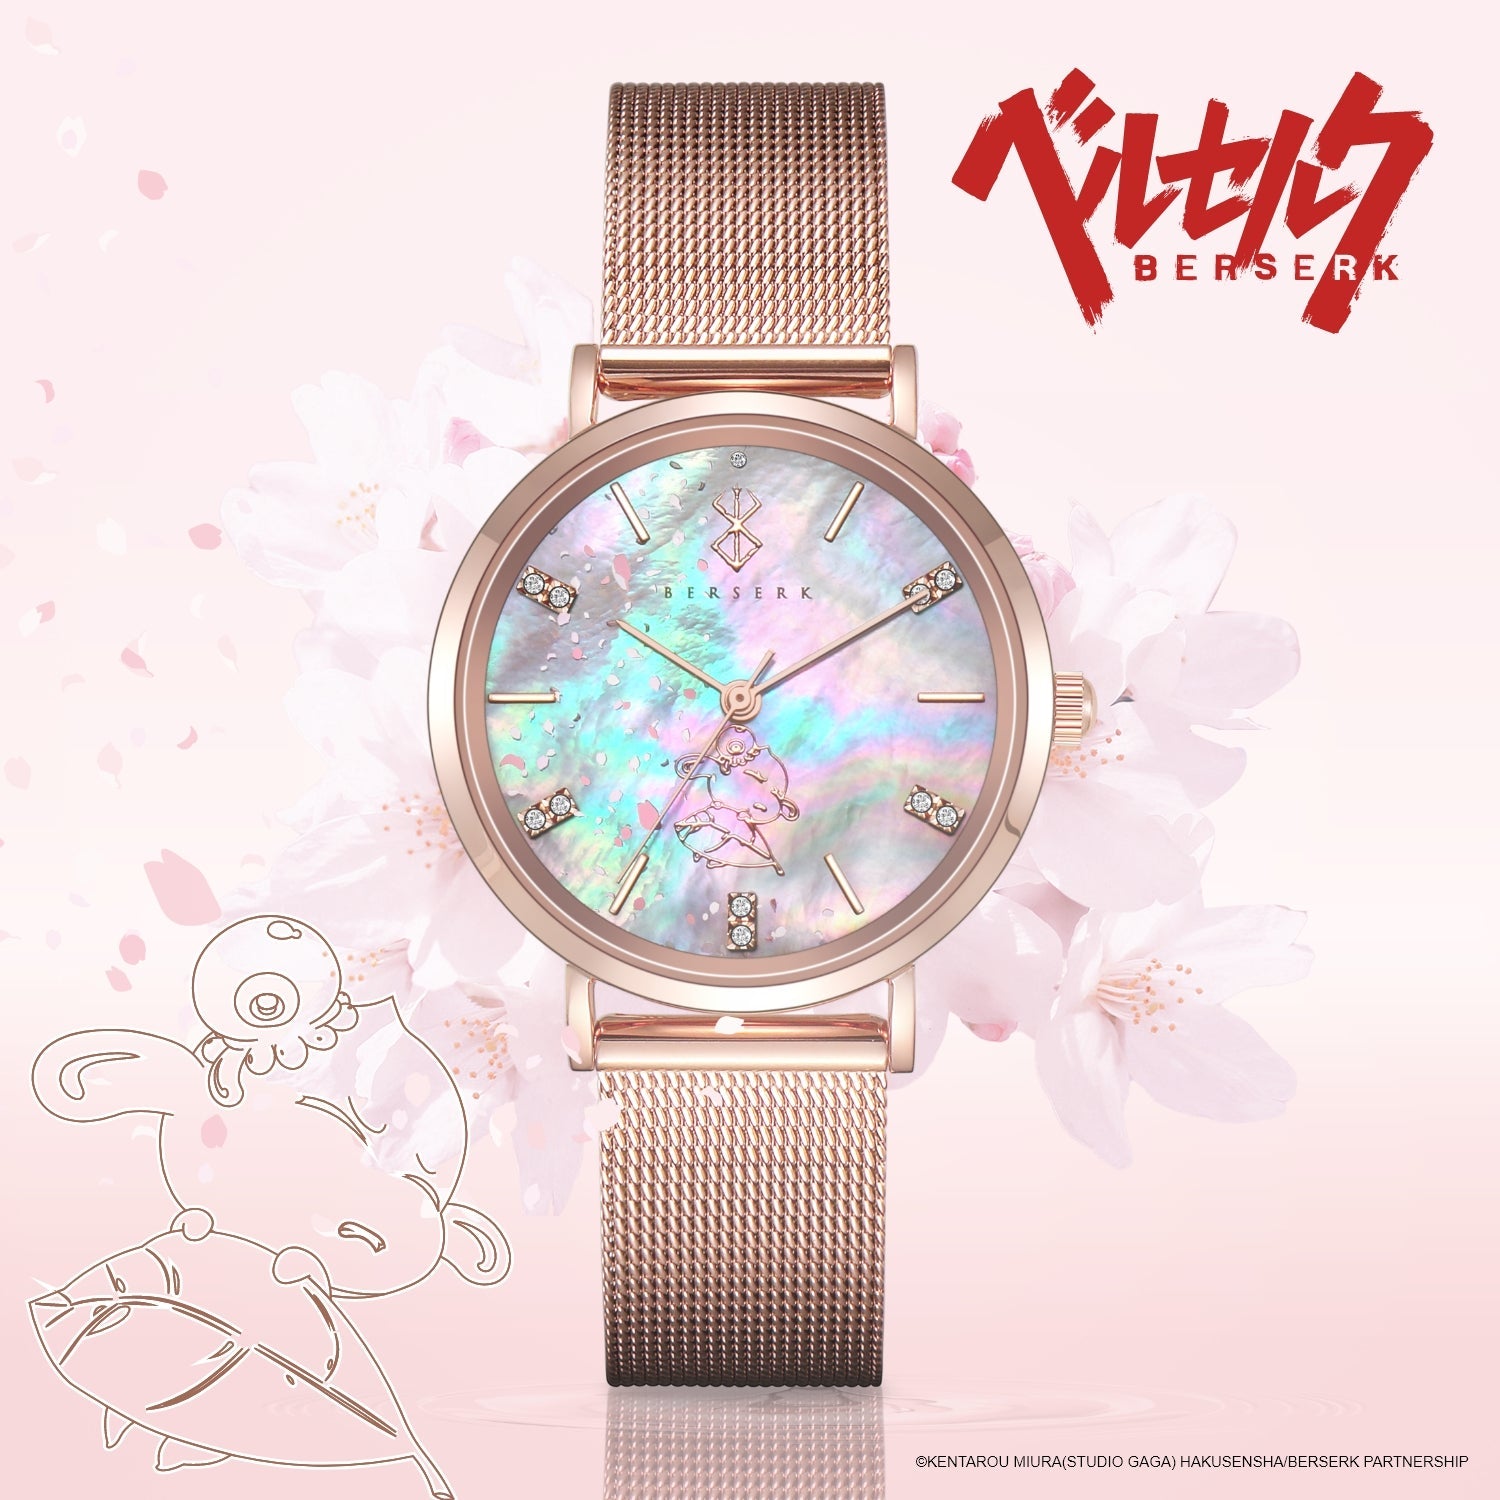 "Berserk" Natural Diamond Solar Watch Pack - 公式通販サイト「アニメコレクション/Anime Collection」